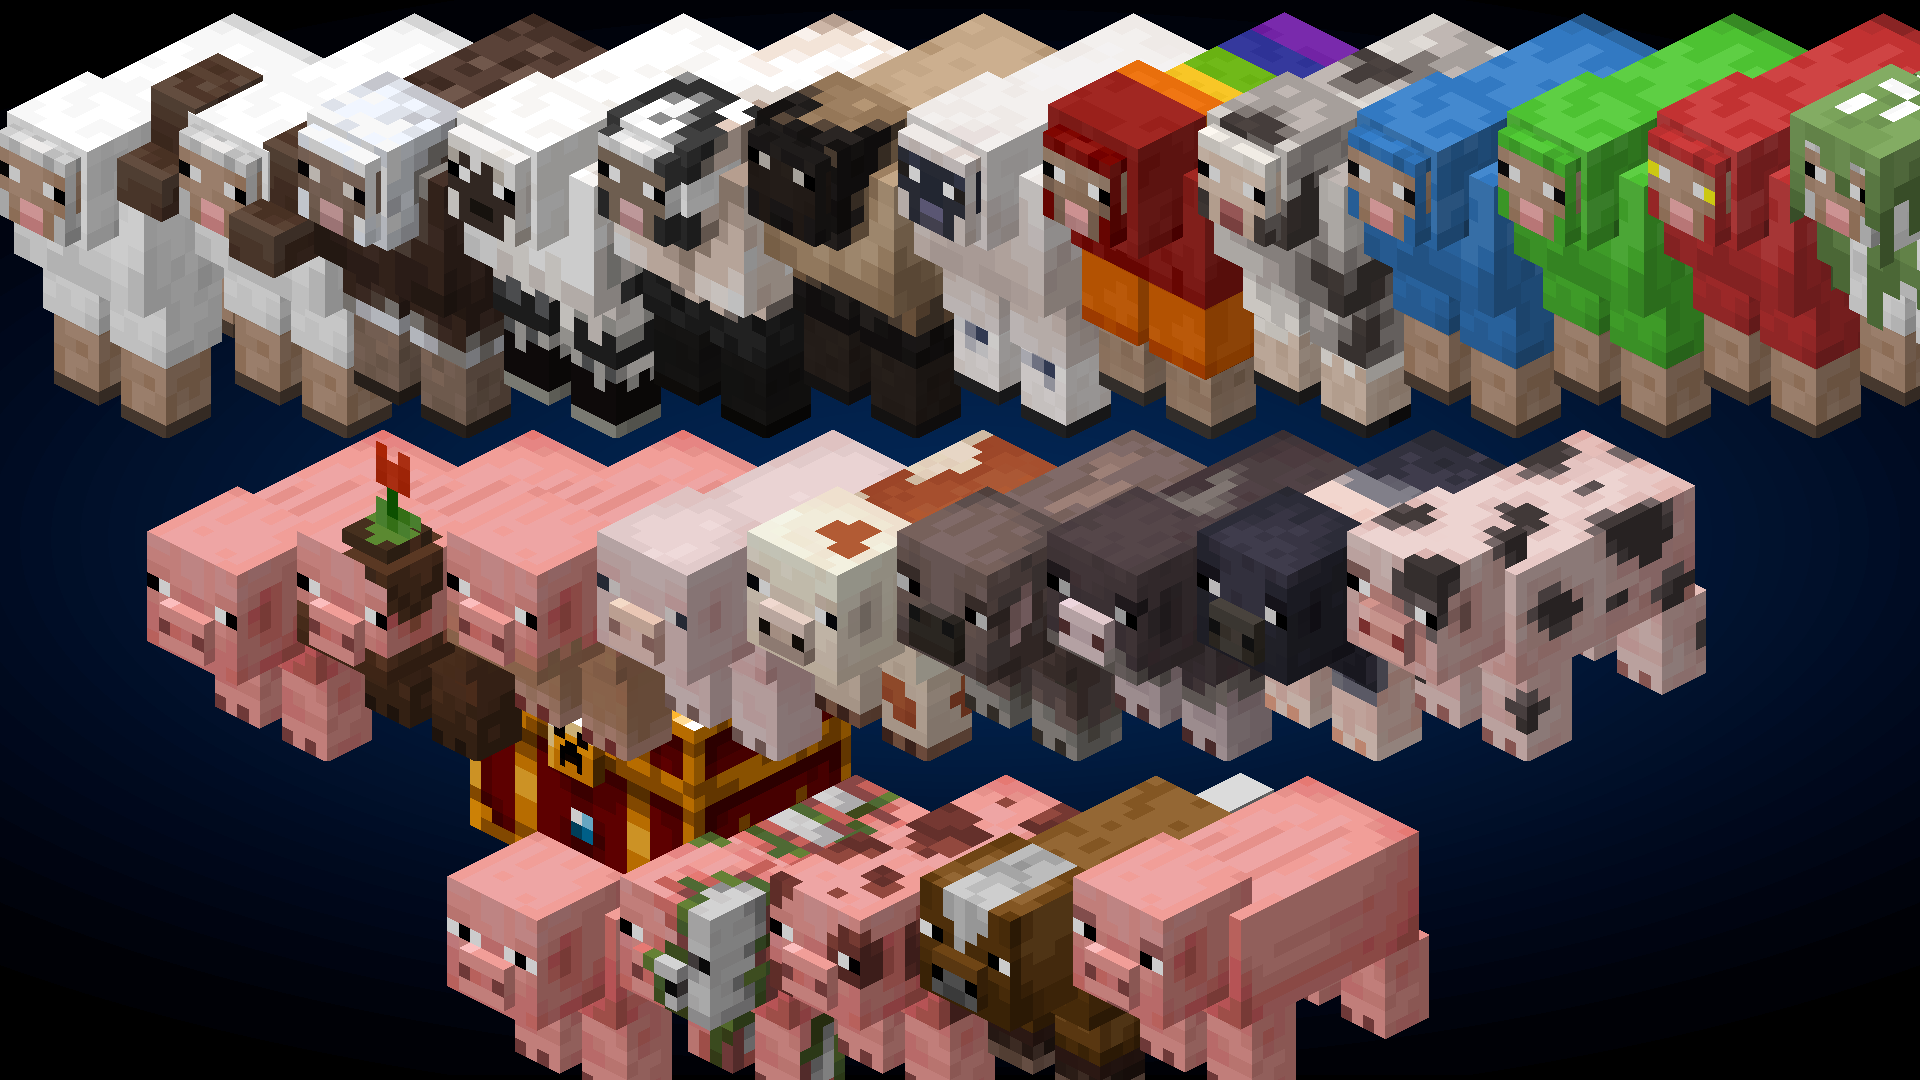 Cool Sheep and Pigs!